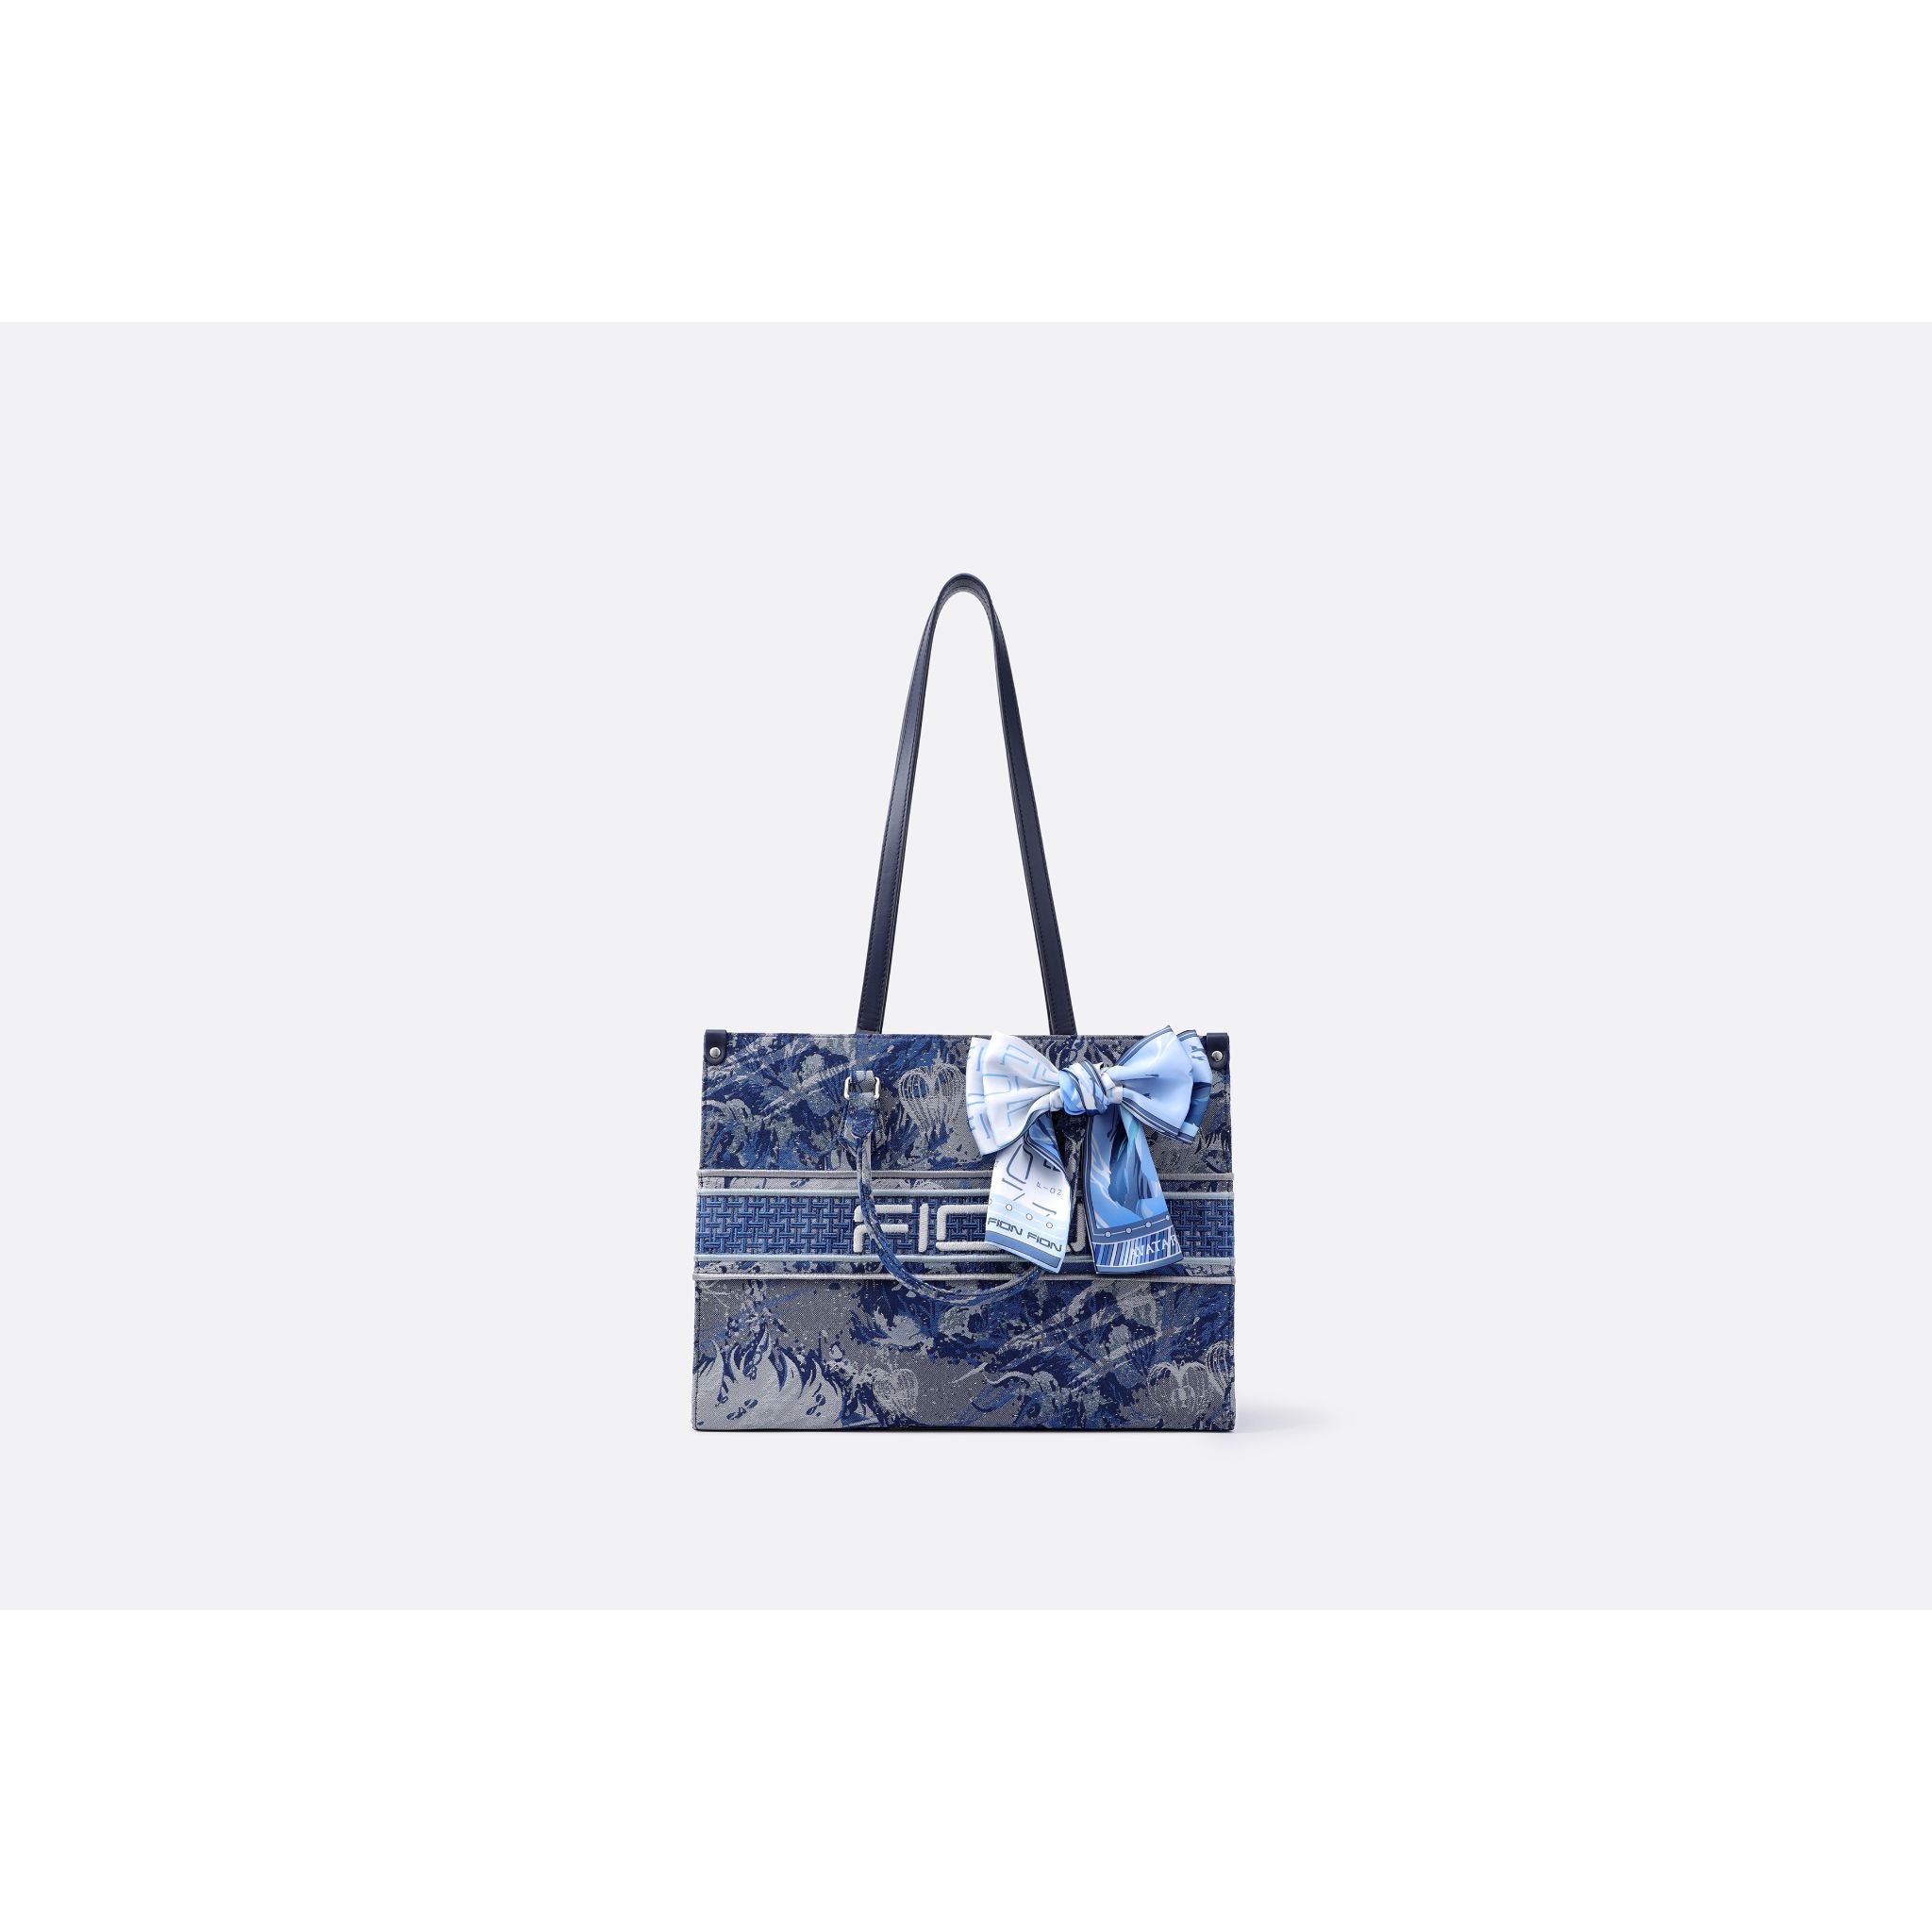 FION Avatar Jacquard with Cow Leather Large Tote Bag